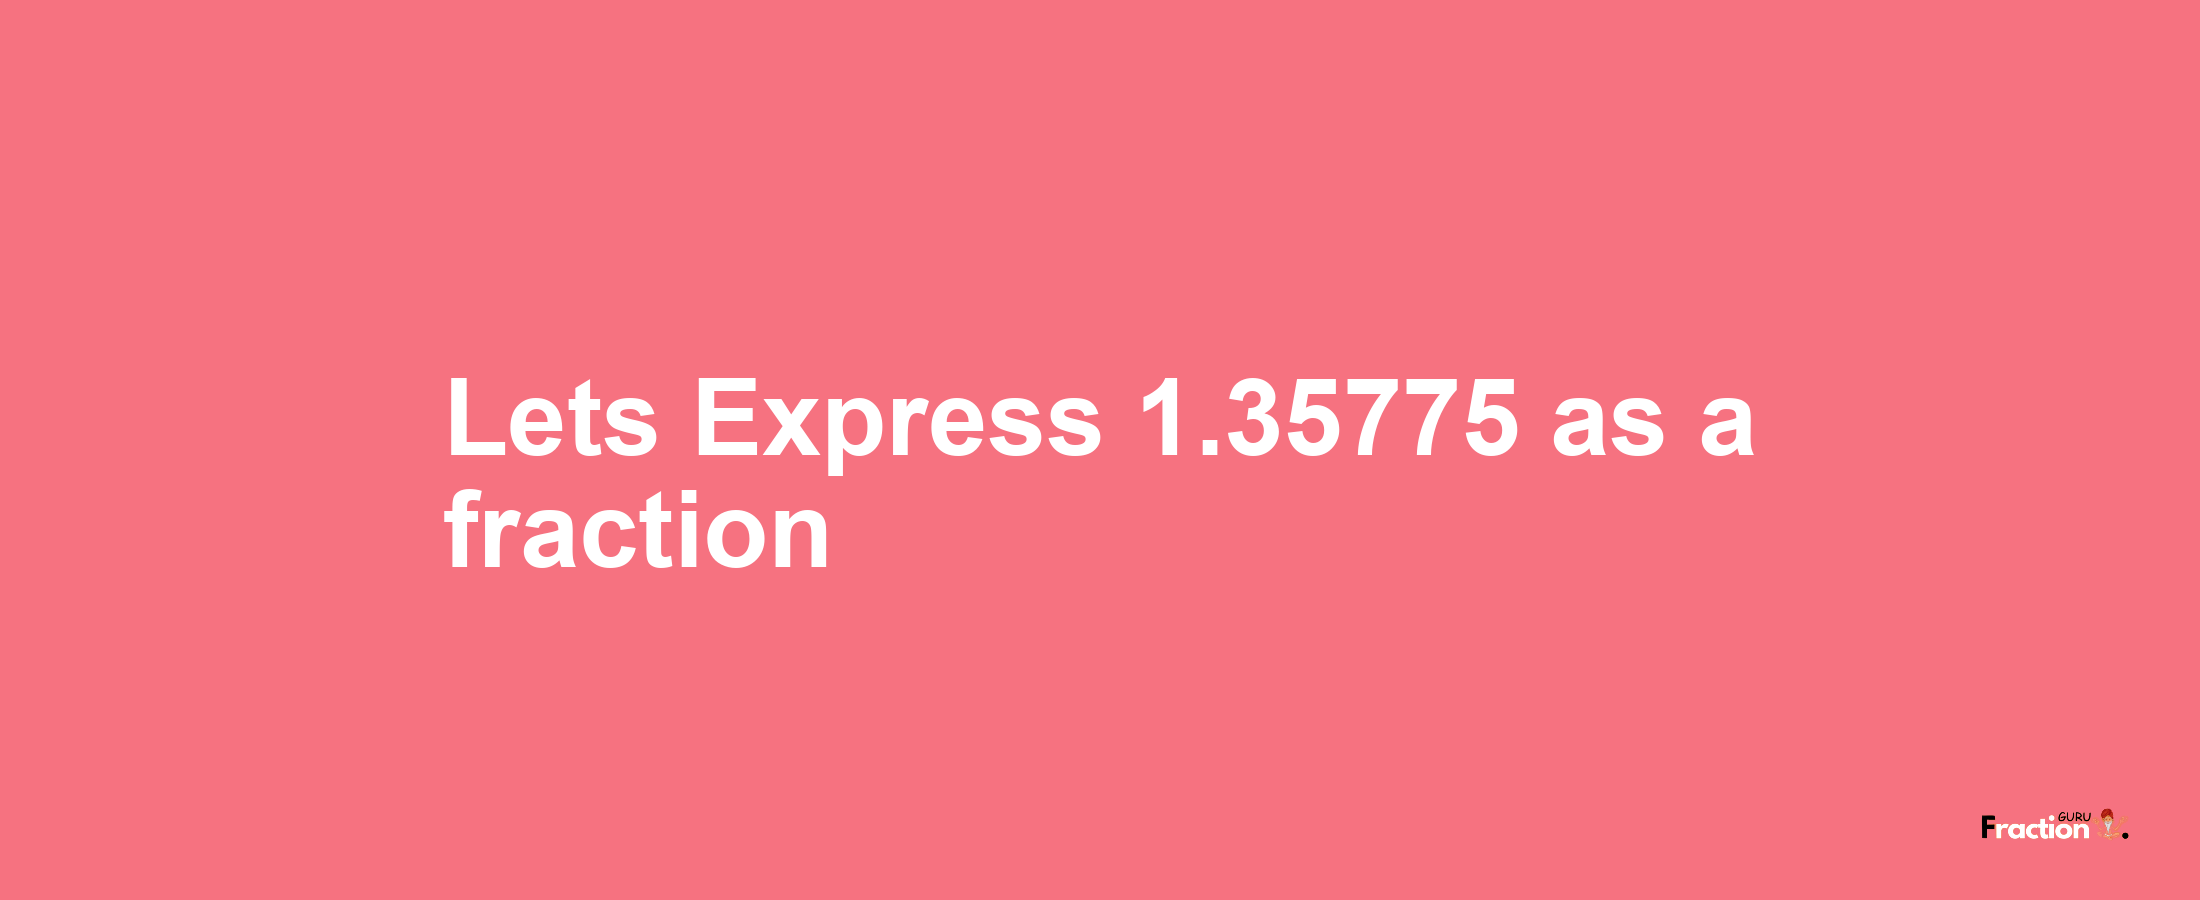 Lets Express 1.35775 as afraction